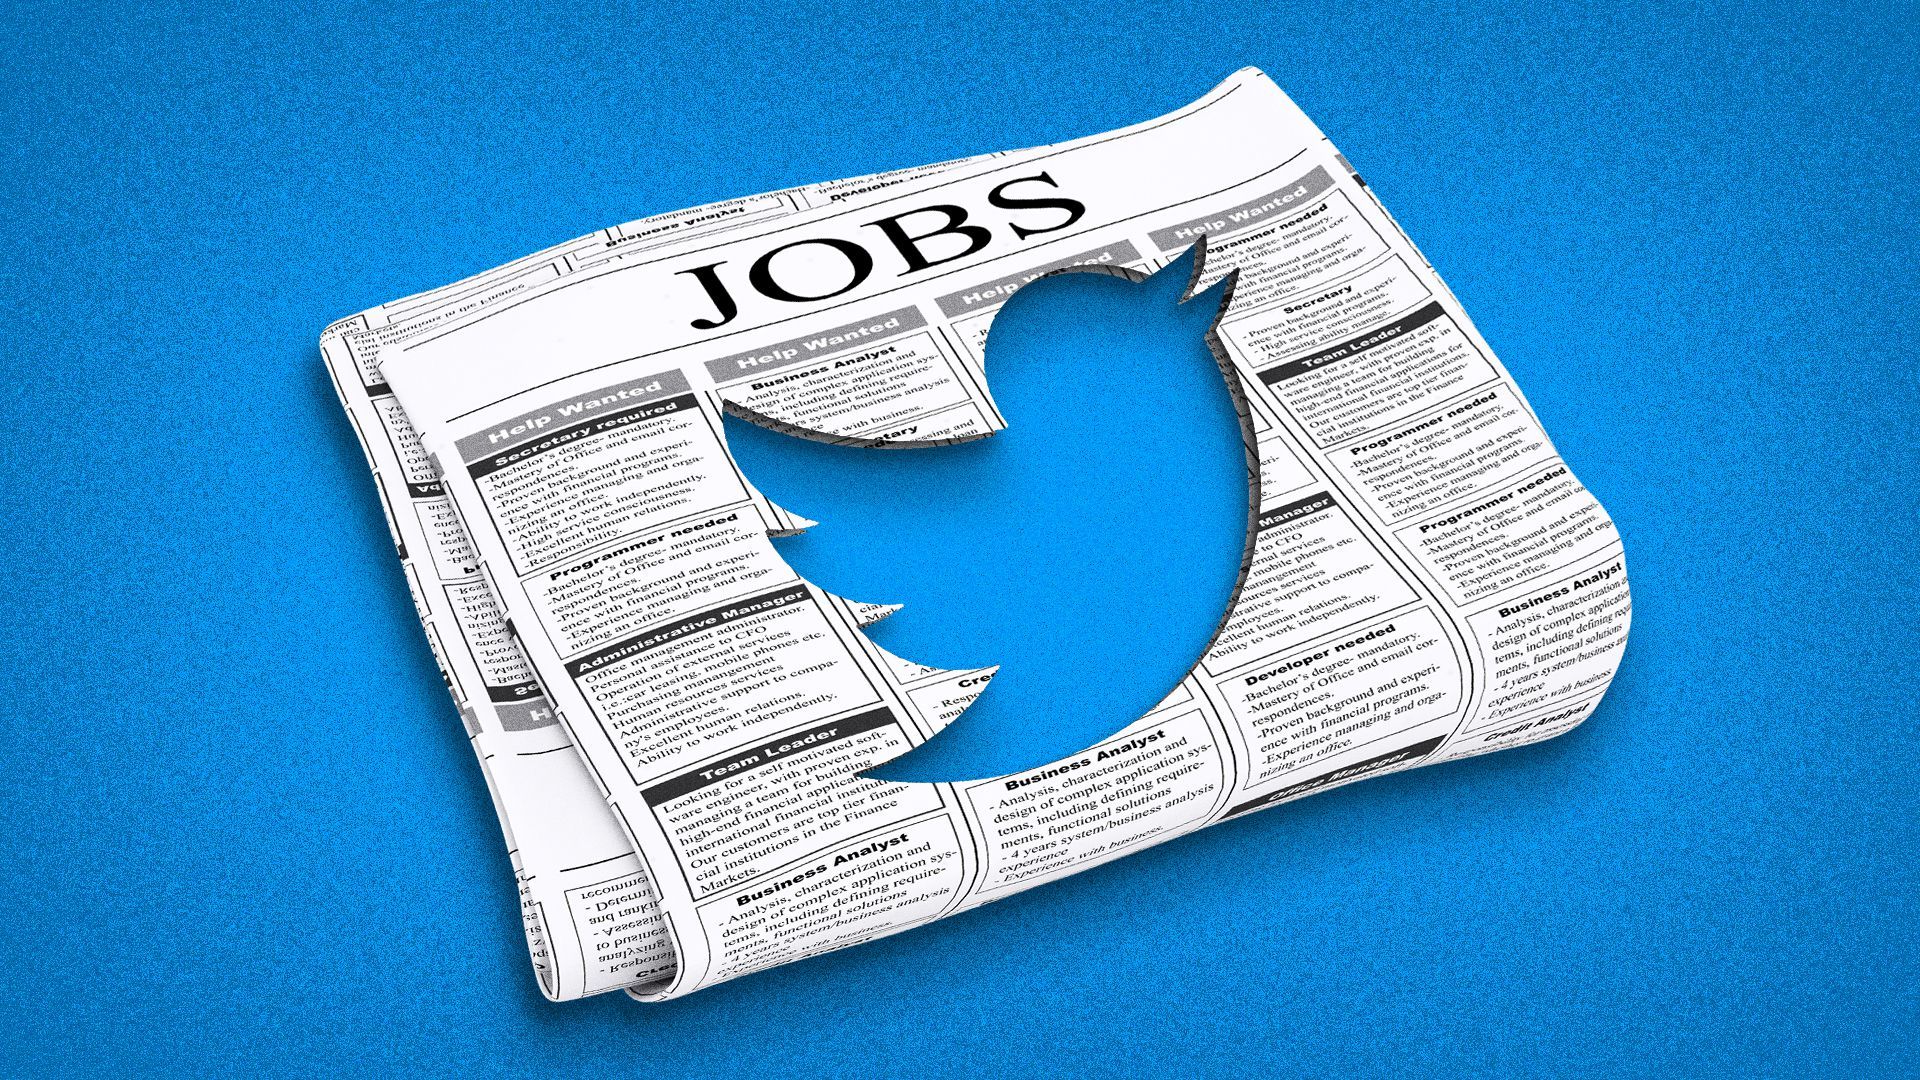 Illustration of the Twitter logo cutout from the jobs page in a newspaper. 